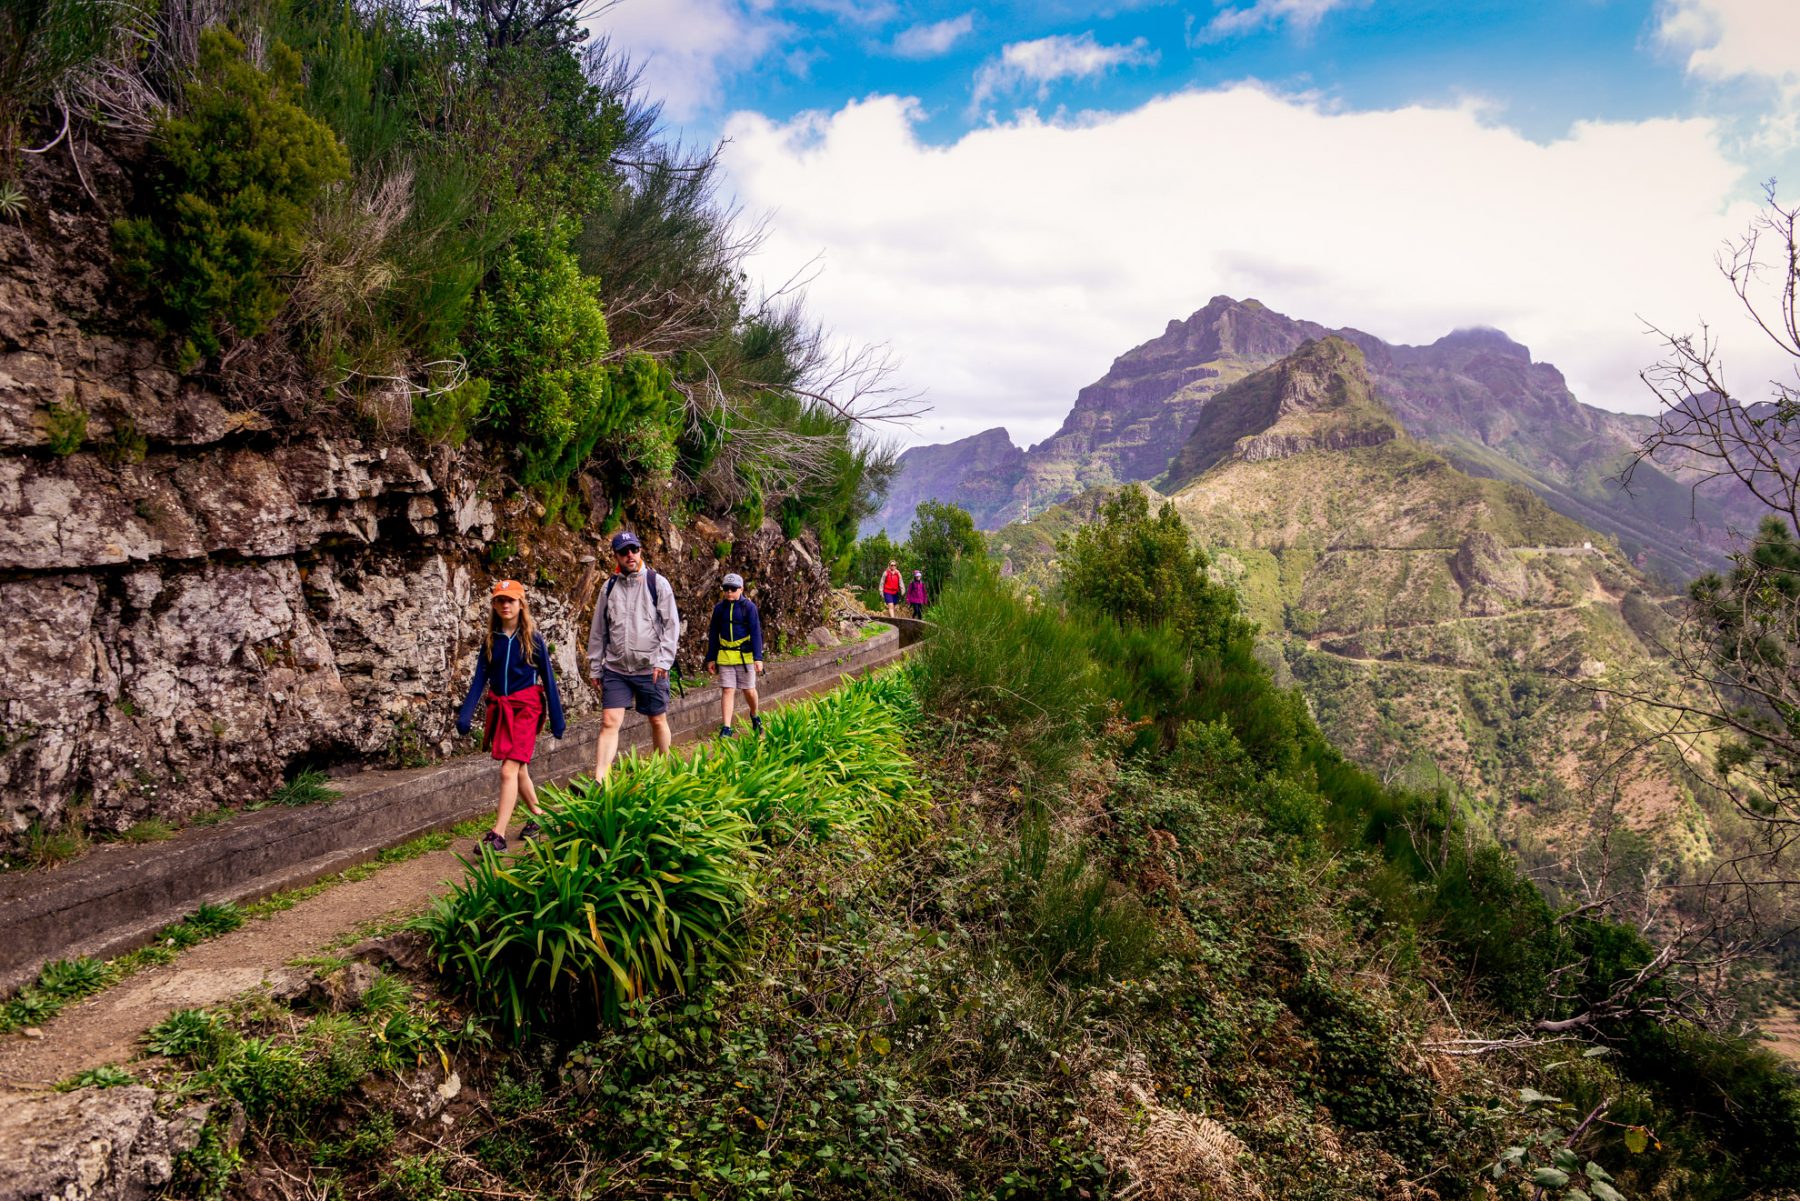 The mountains and levadas of Madeira